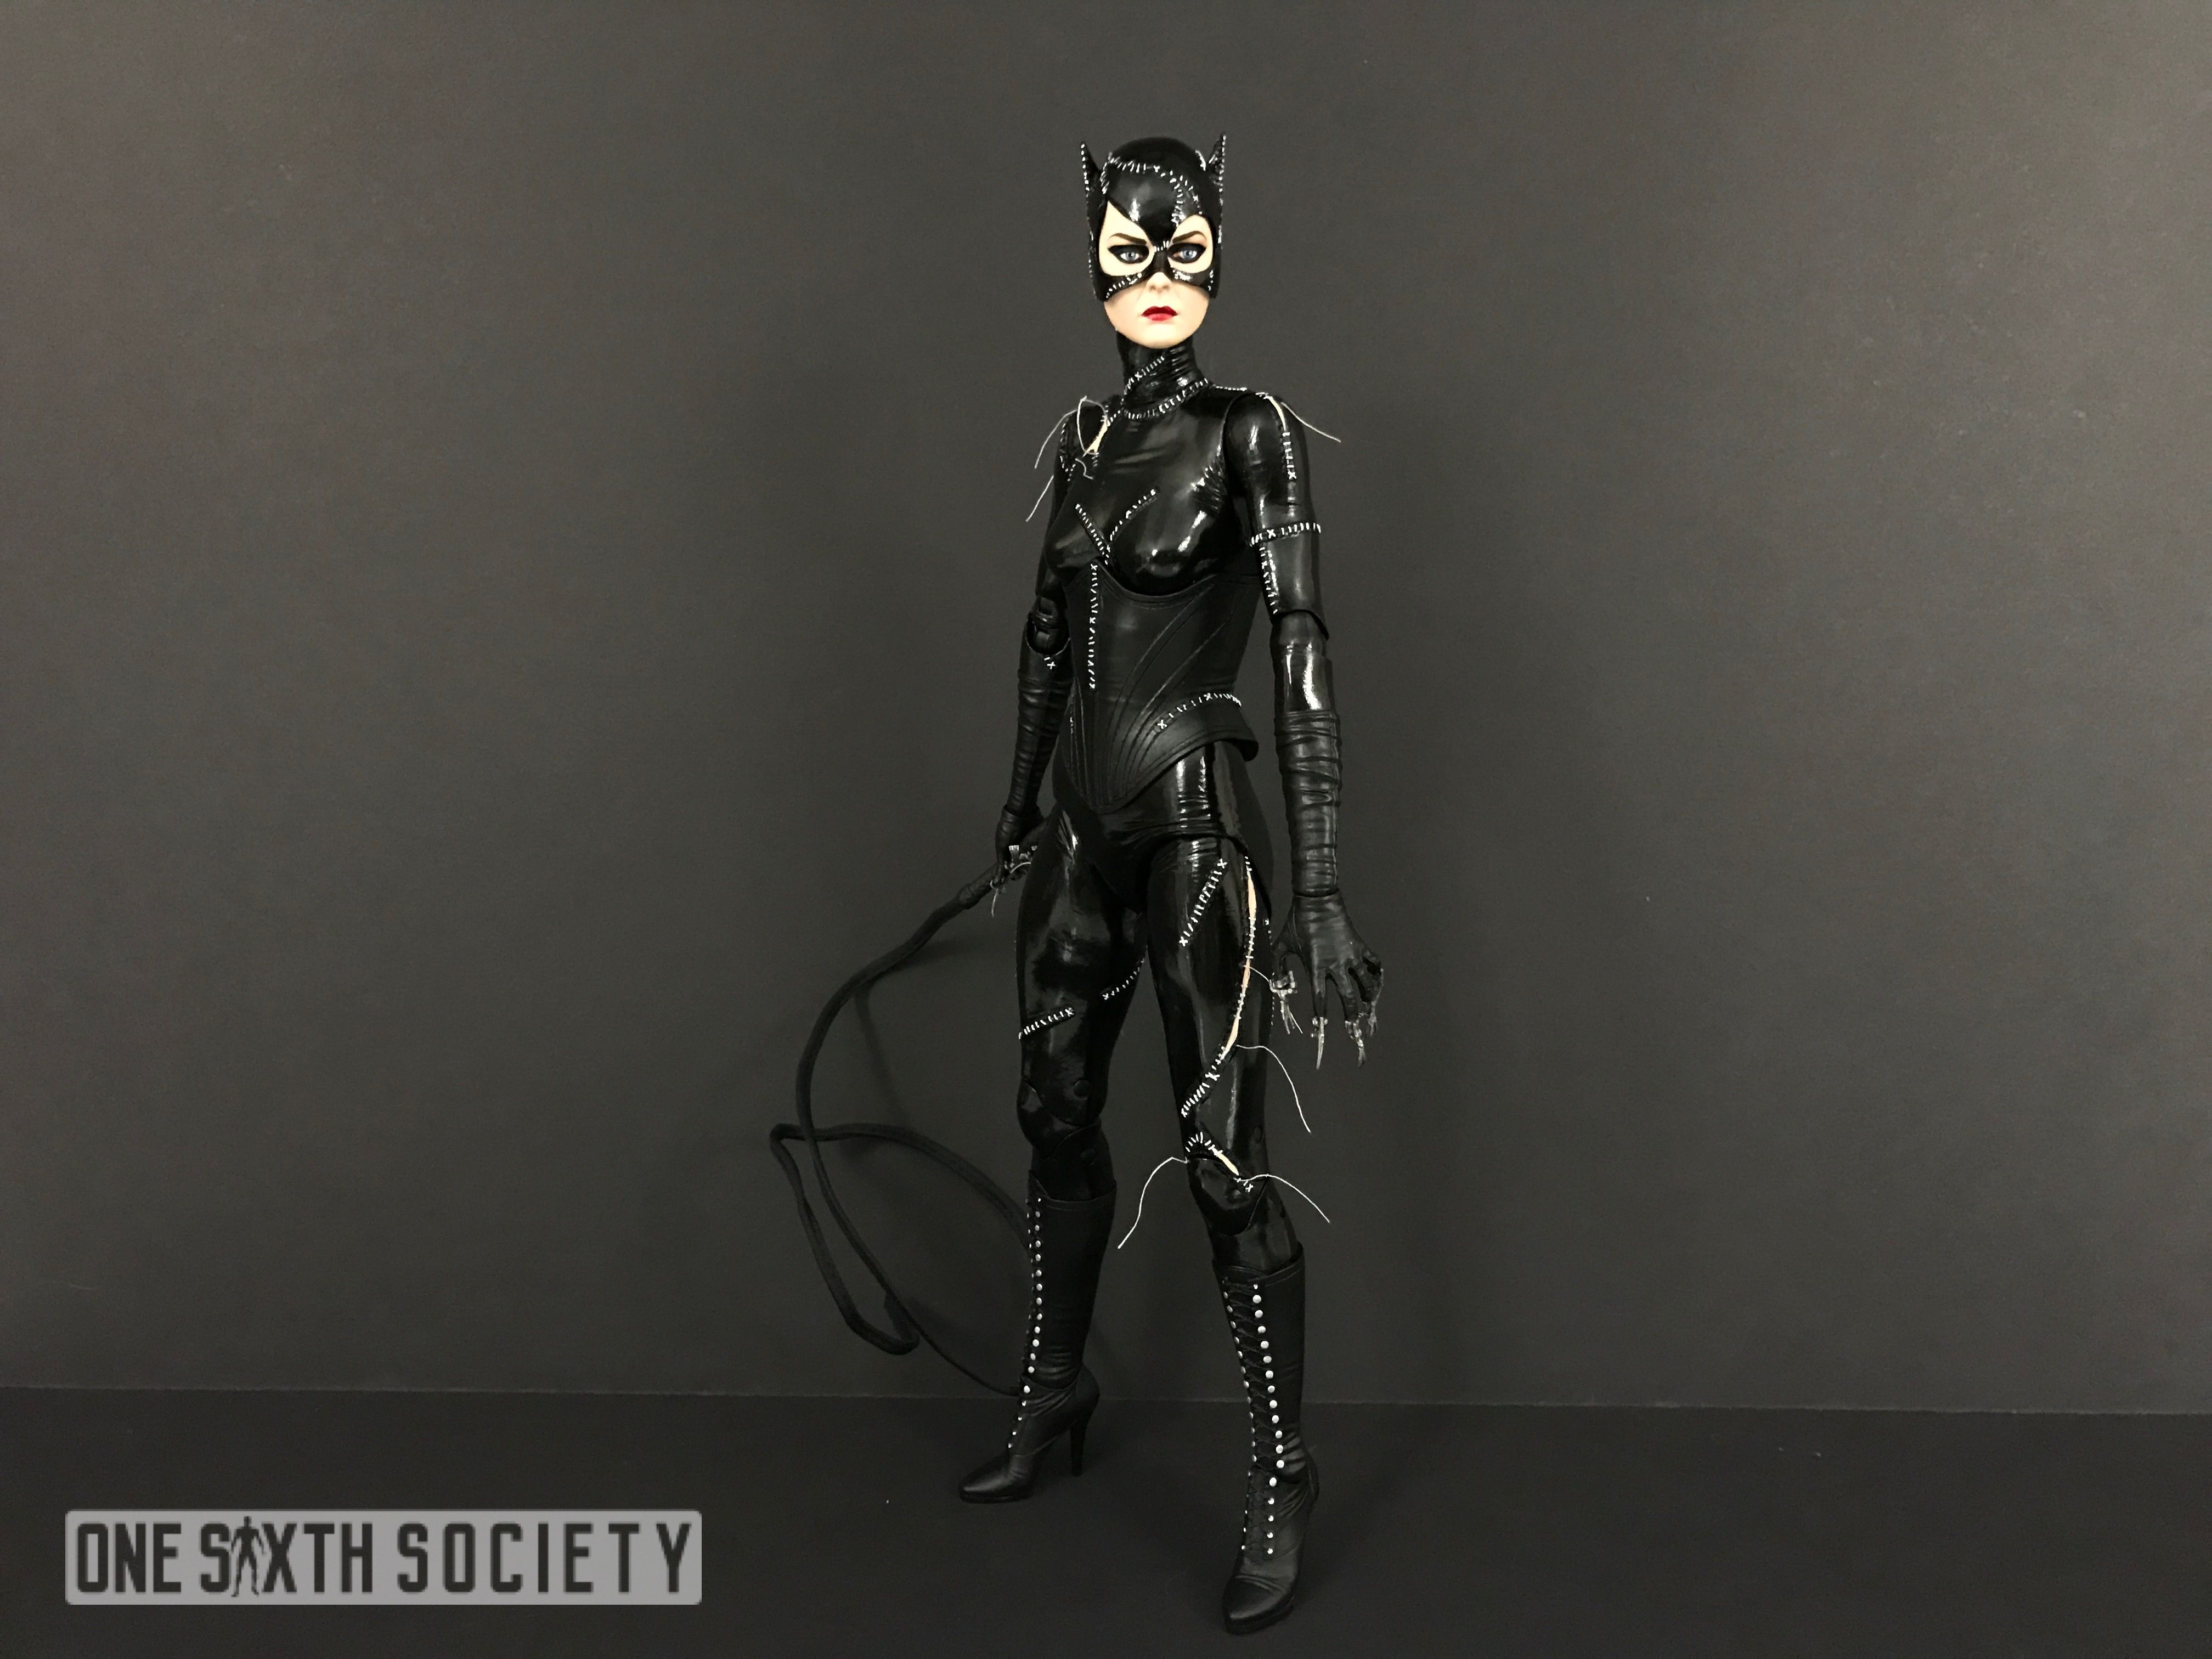 NECA's Catwoman comes with some nice accessories! A taser and a whip!